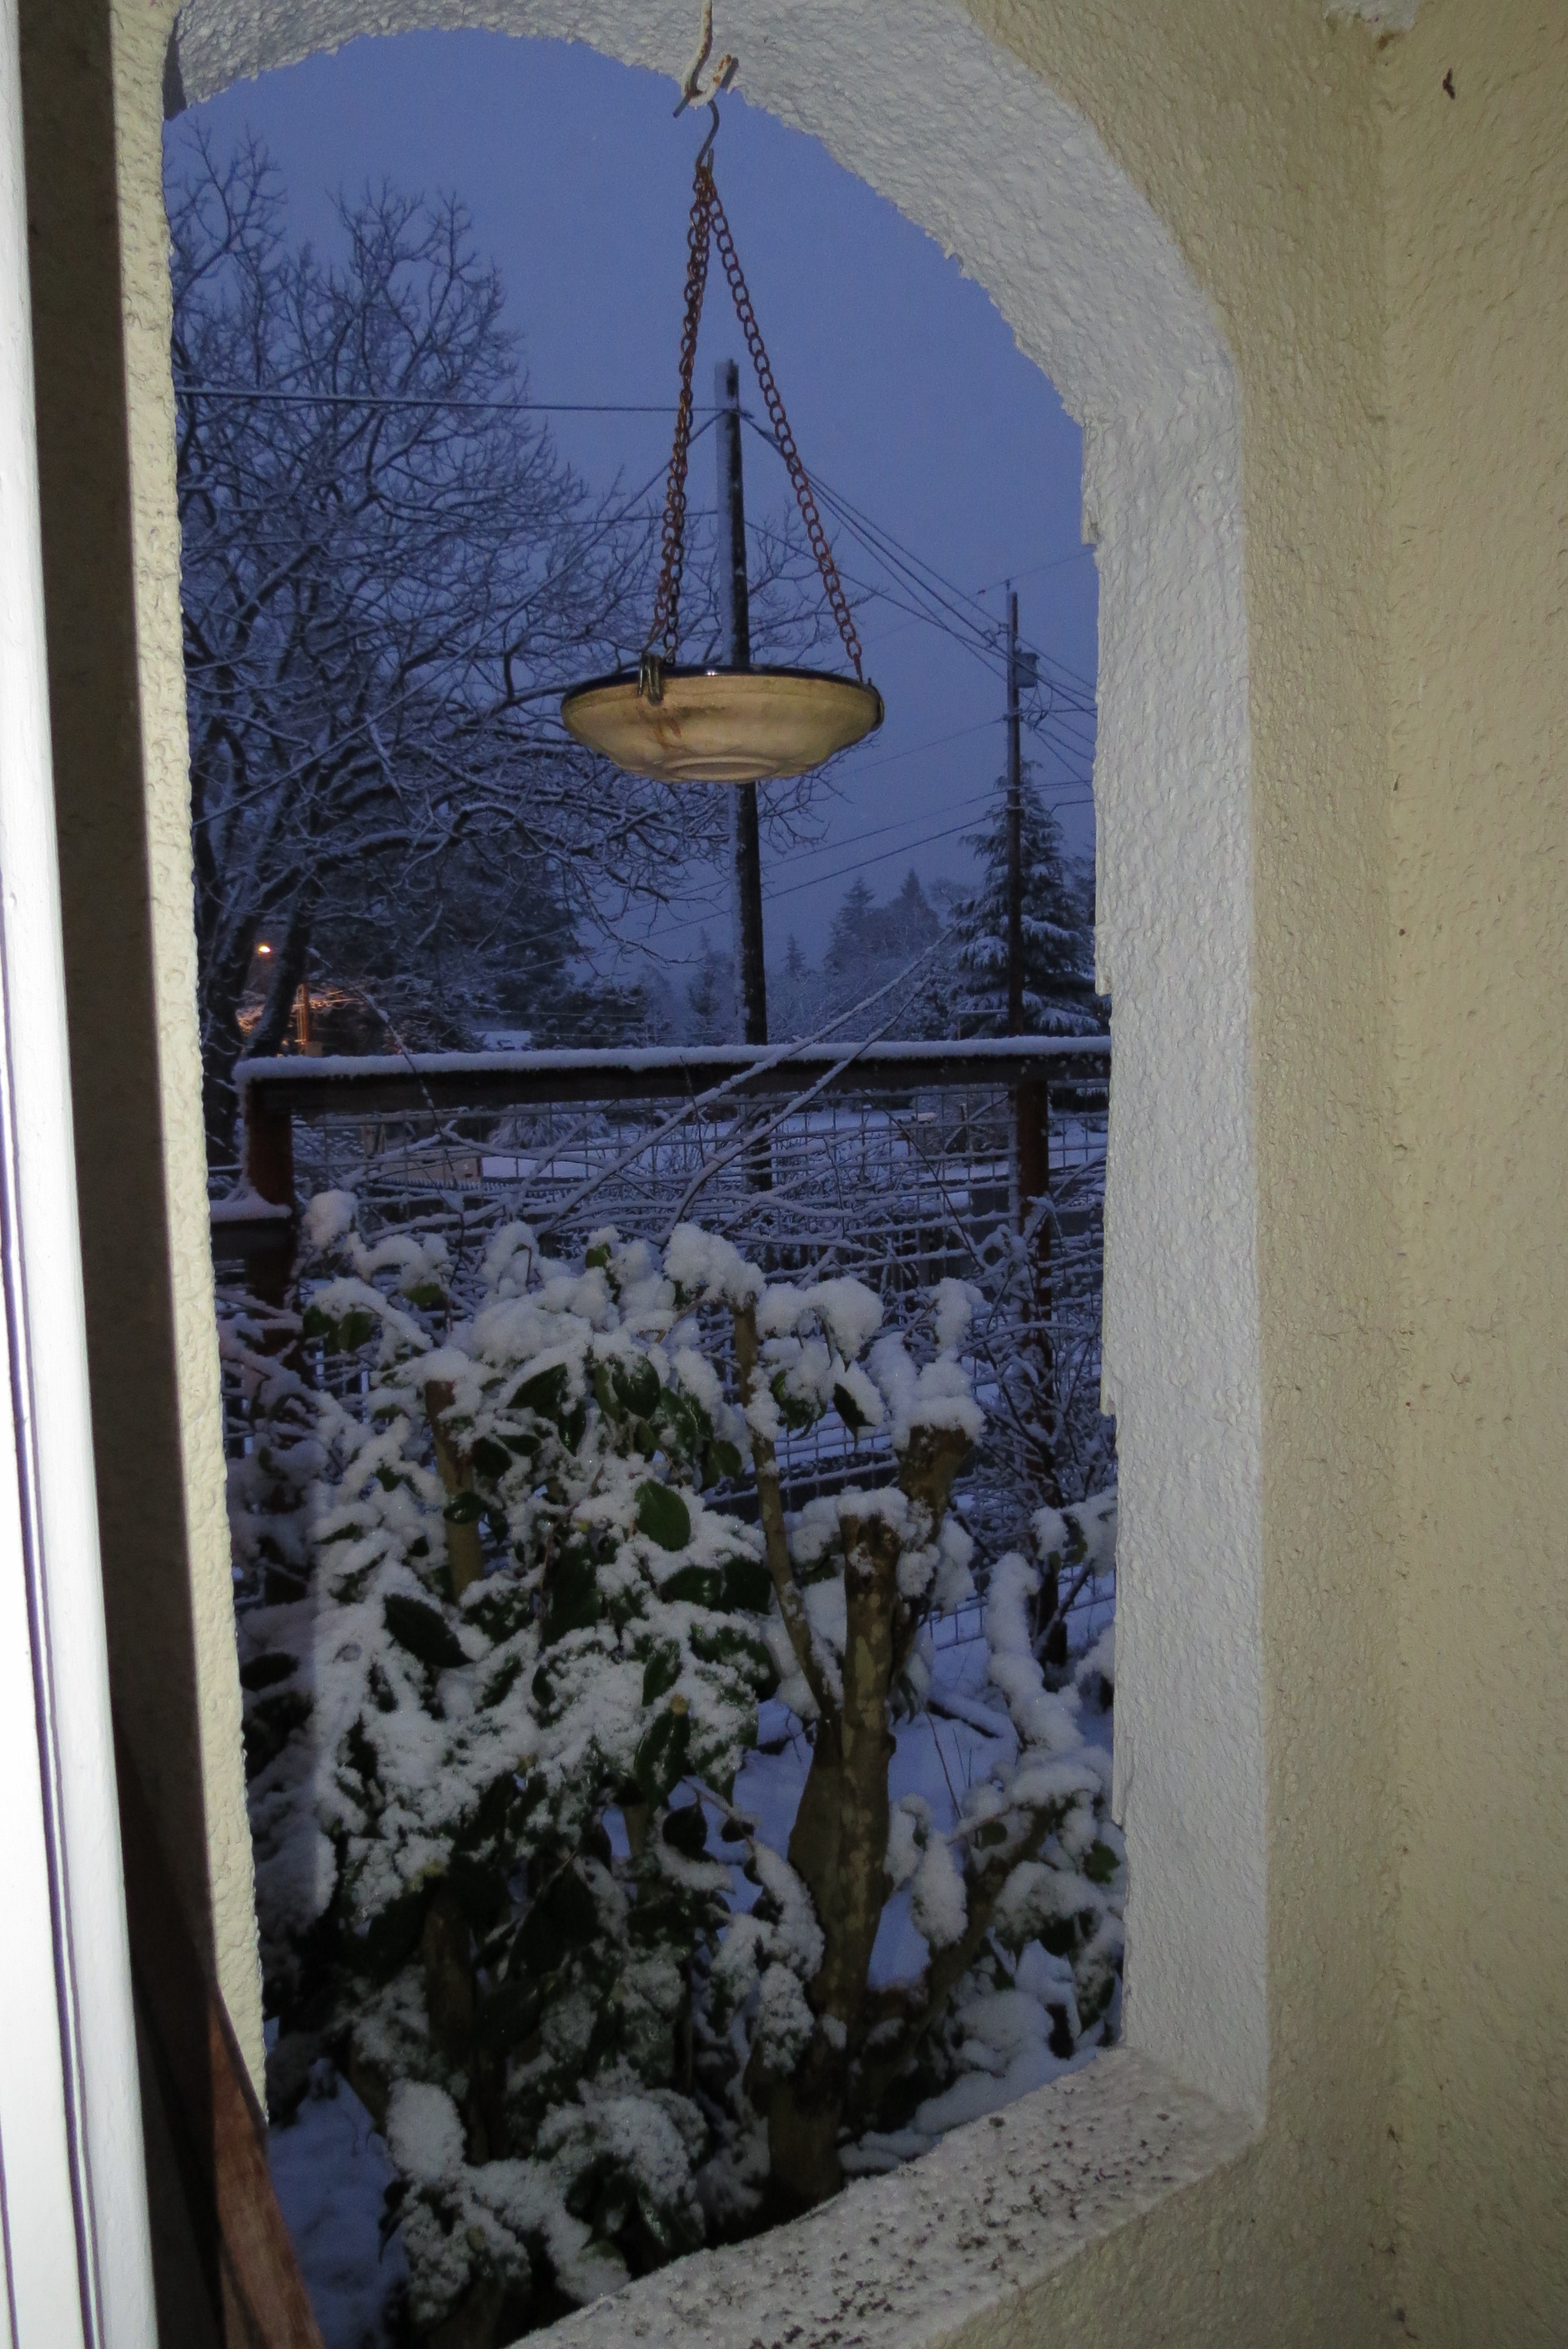 archway in the evening, with a hanging birdbath and snow on a yard, all blue light